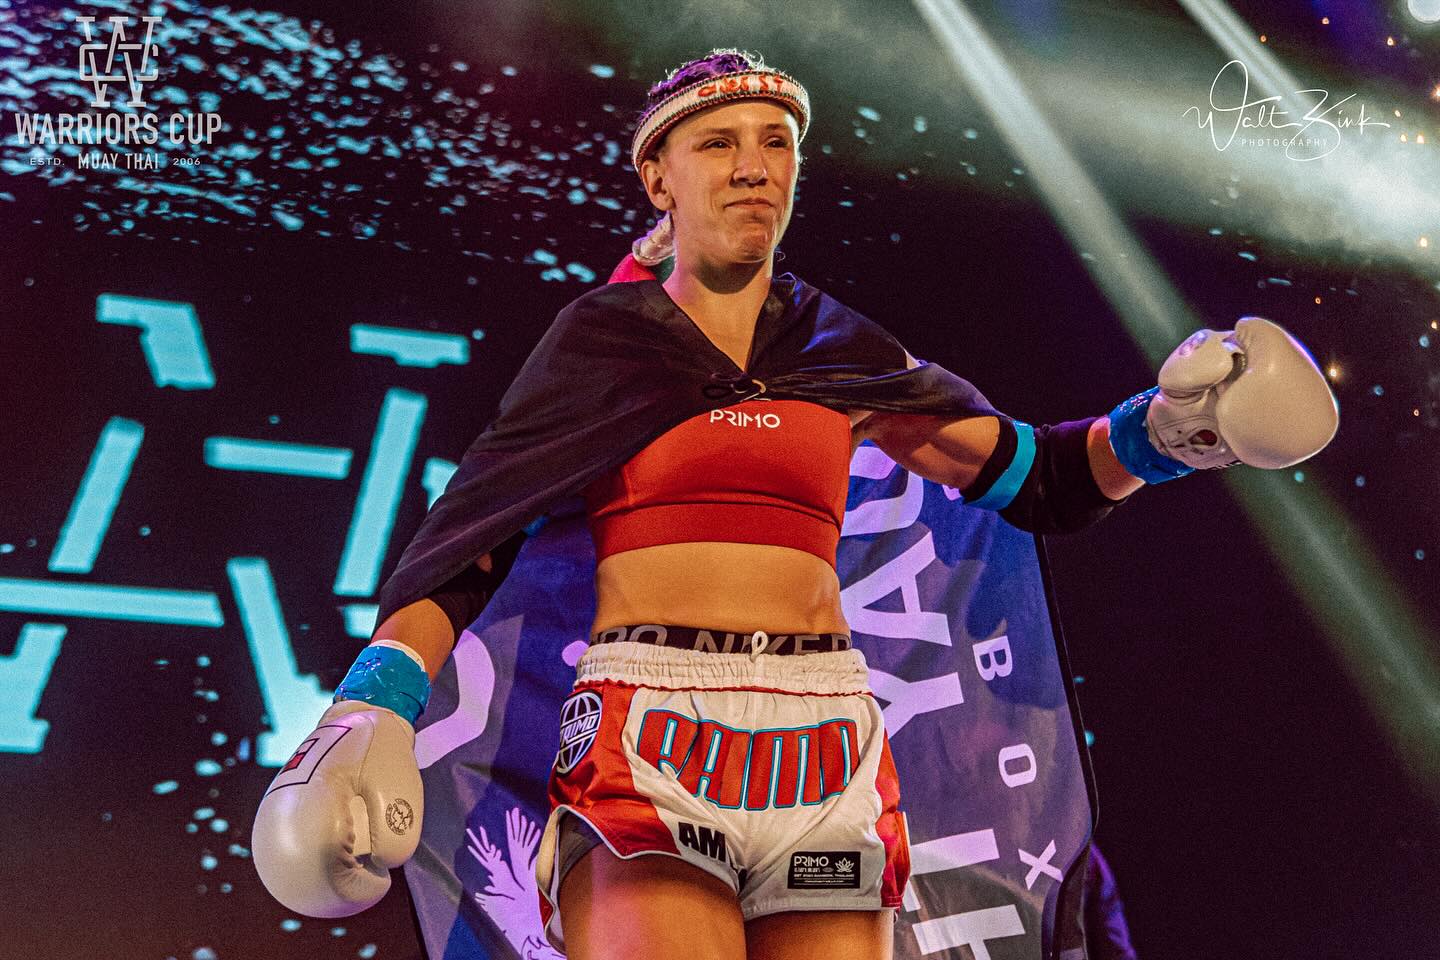 ”Follow your dreams, make this a wonderful life” 🌹

2 more sleeps until I walk the walk for the 6th and final time this year. 2023s been a hell of a wild ride…But this one’s different. And I can’t wait to share it with MY people. 🤍

#Fight #Muaythai #fightnight #conflictmma #Charlestonsc